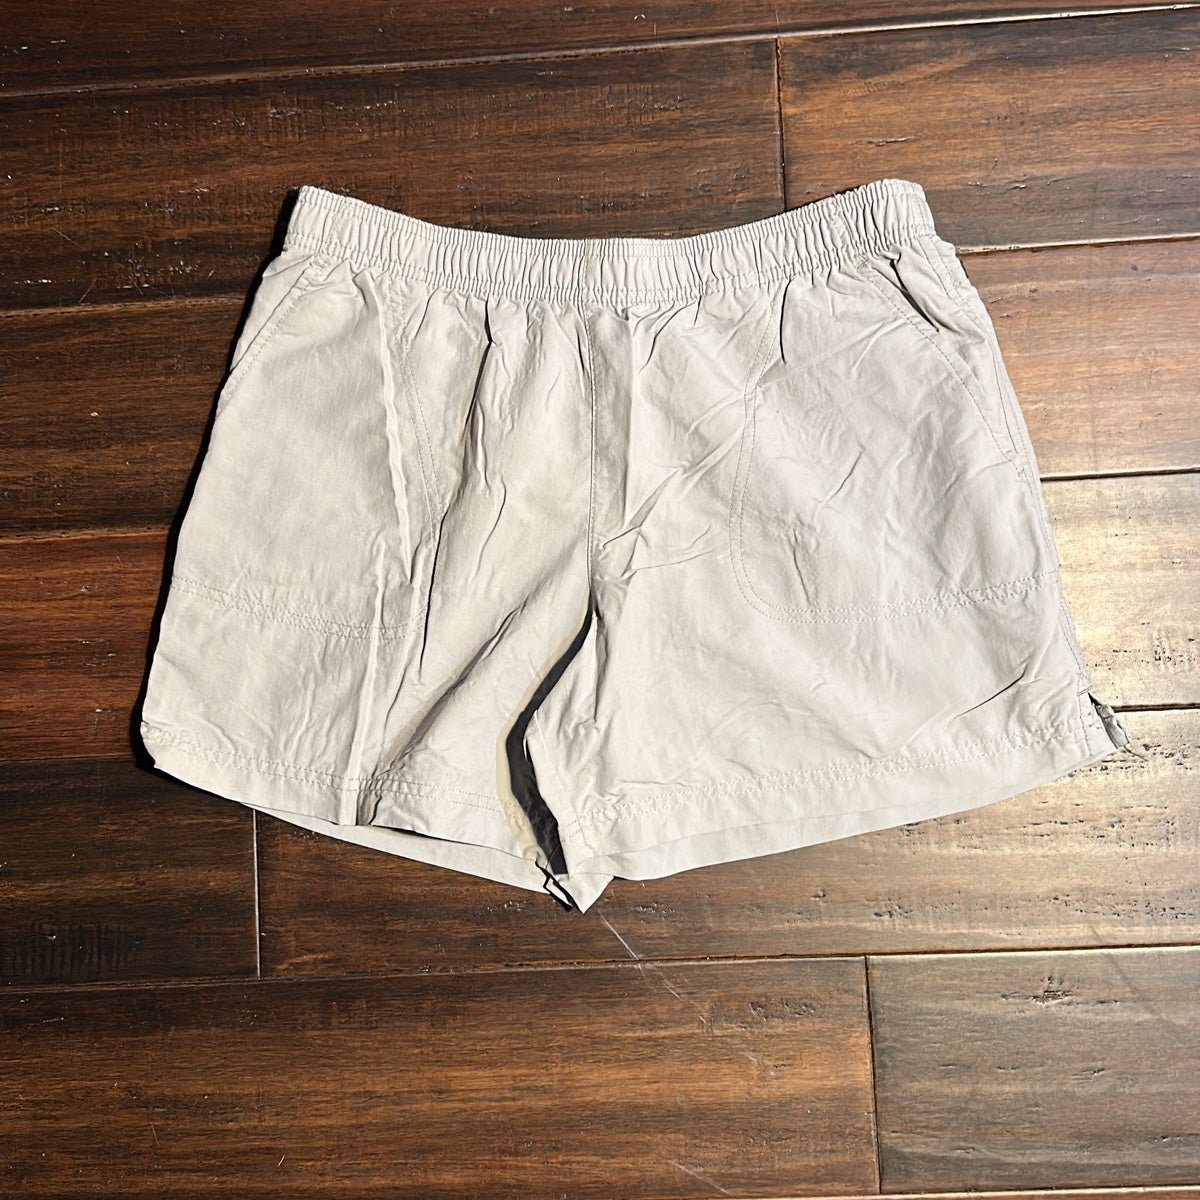 Great Columbia Ladies Shorts kySAYndGH Discount